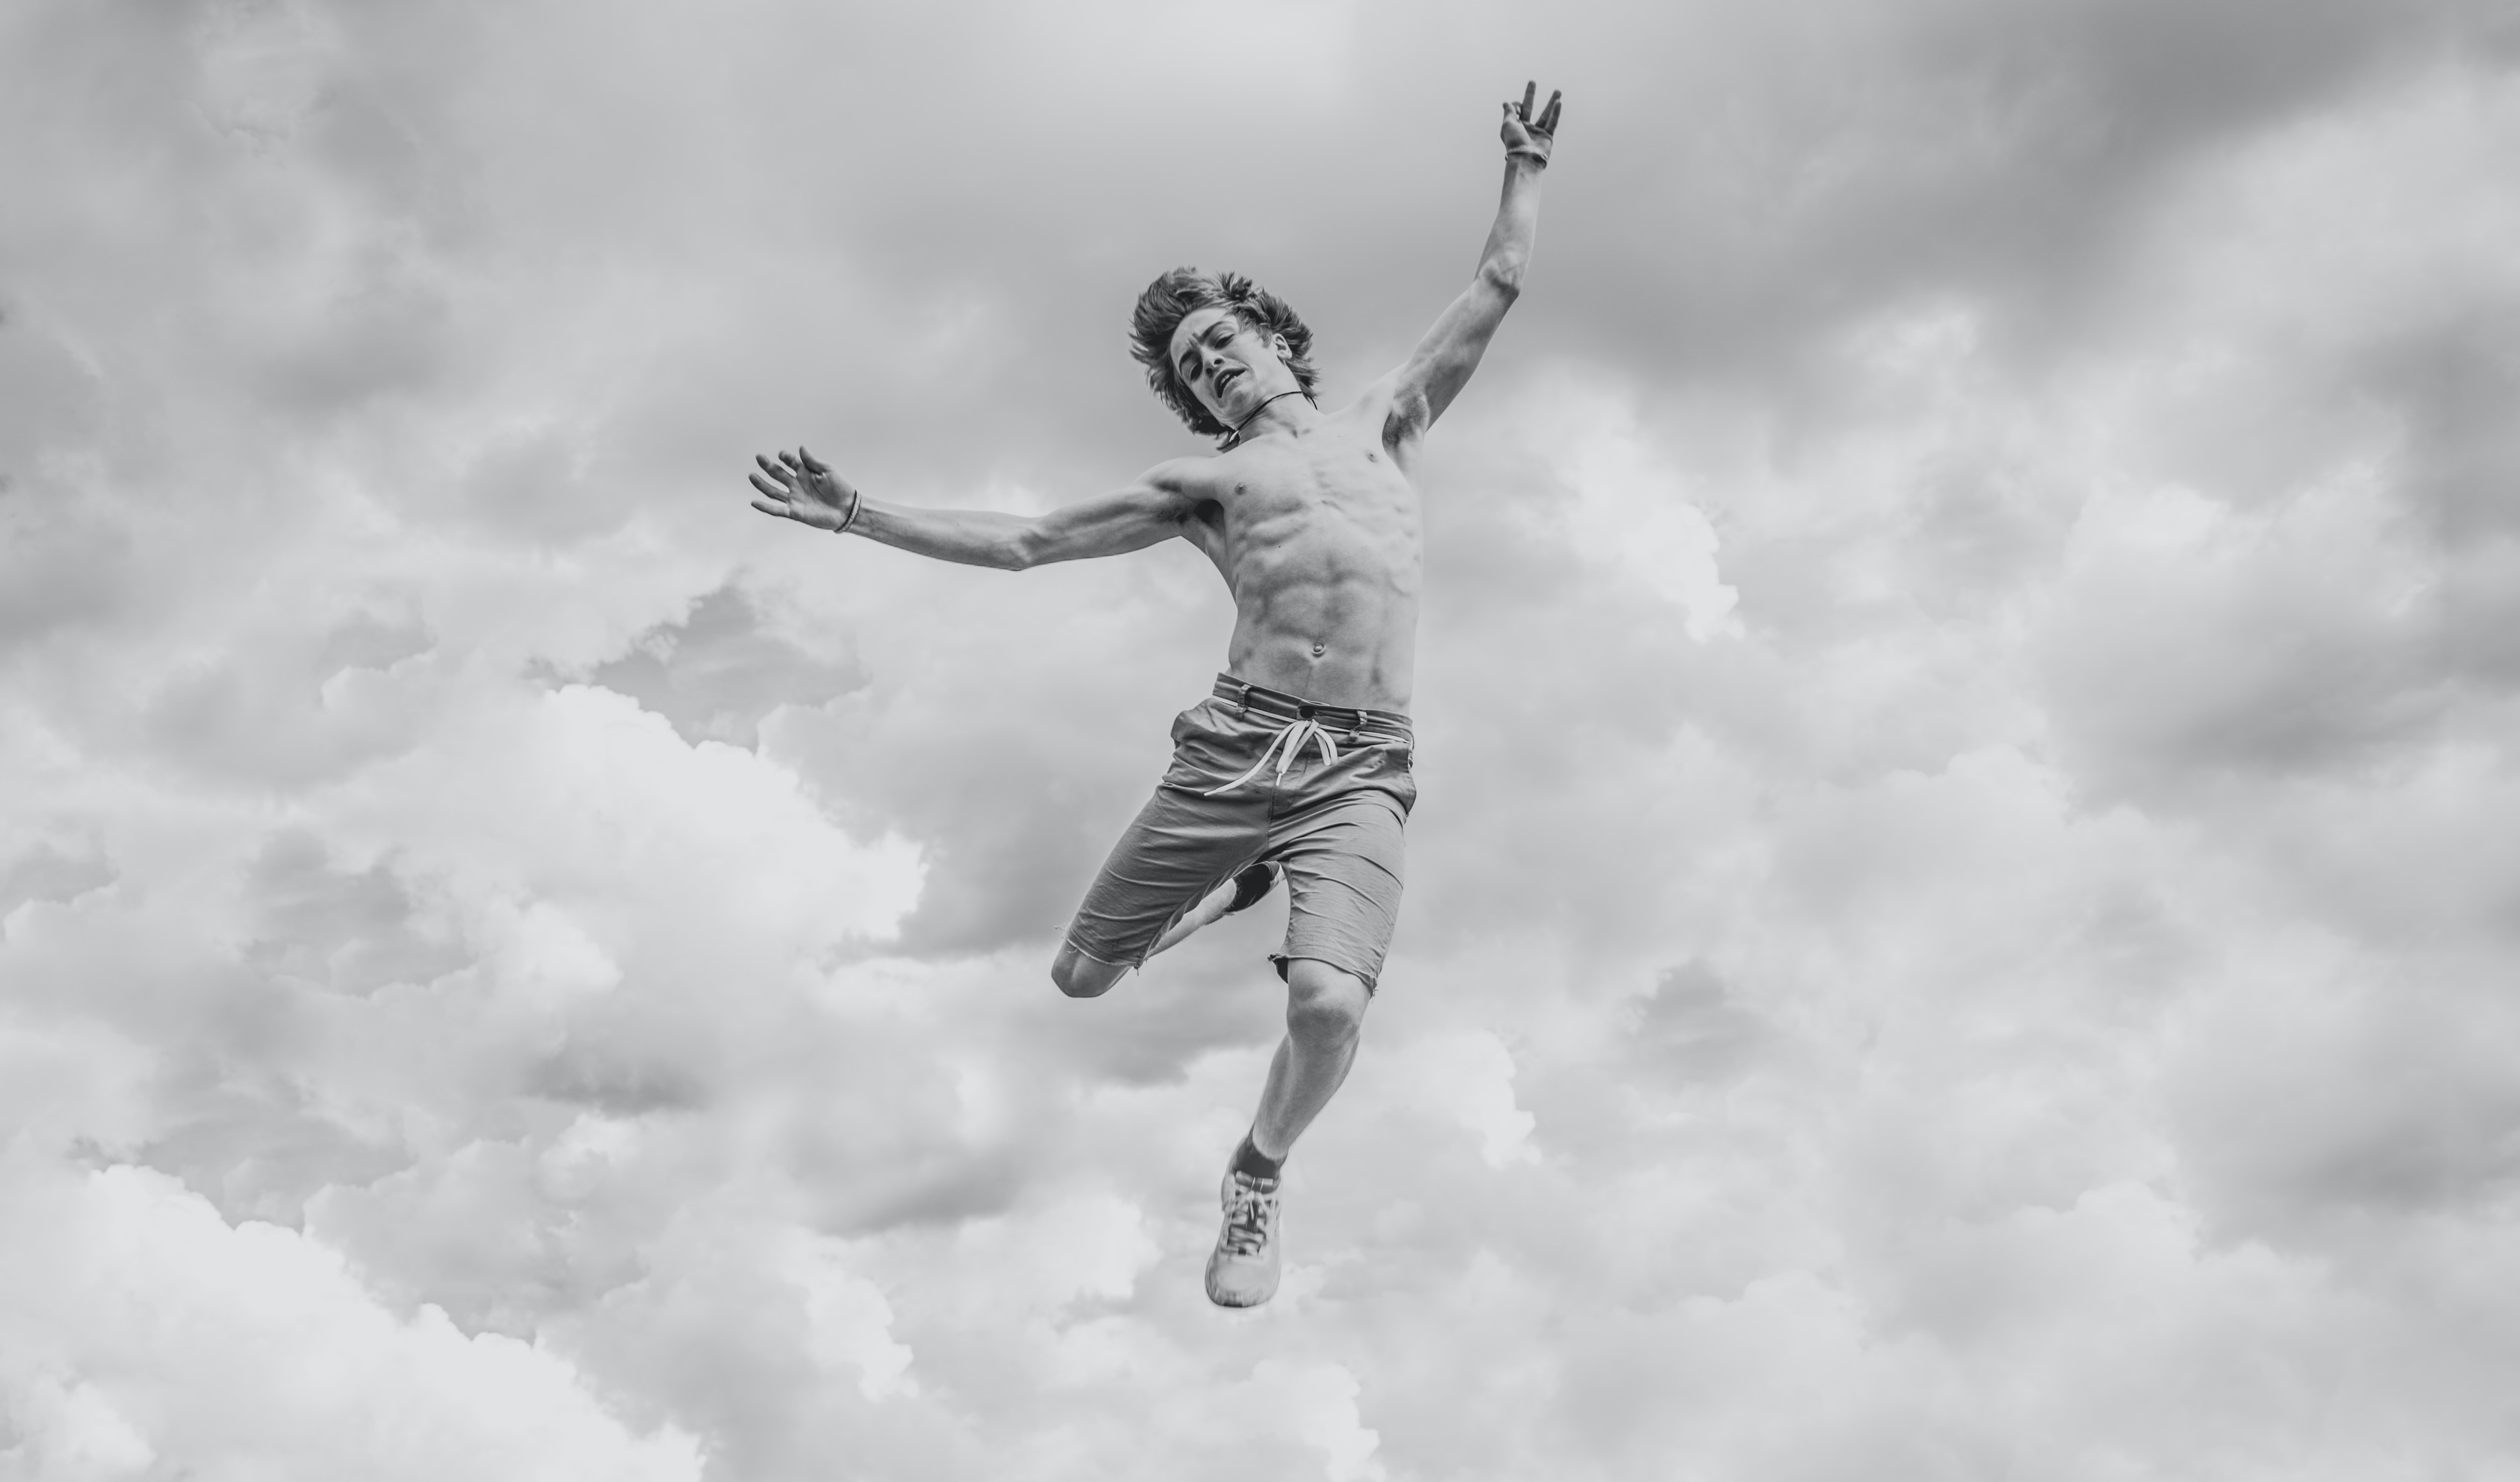 A man with flailing arms and legs that appears to be falling from the cloudy sky above.